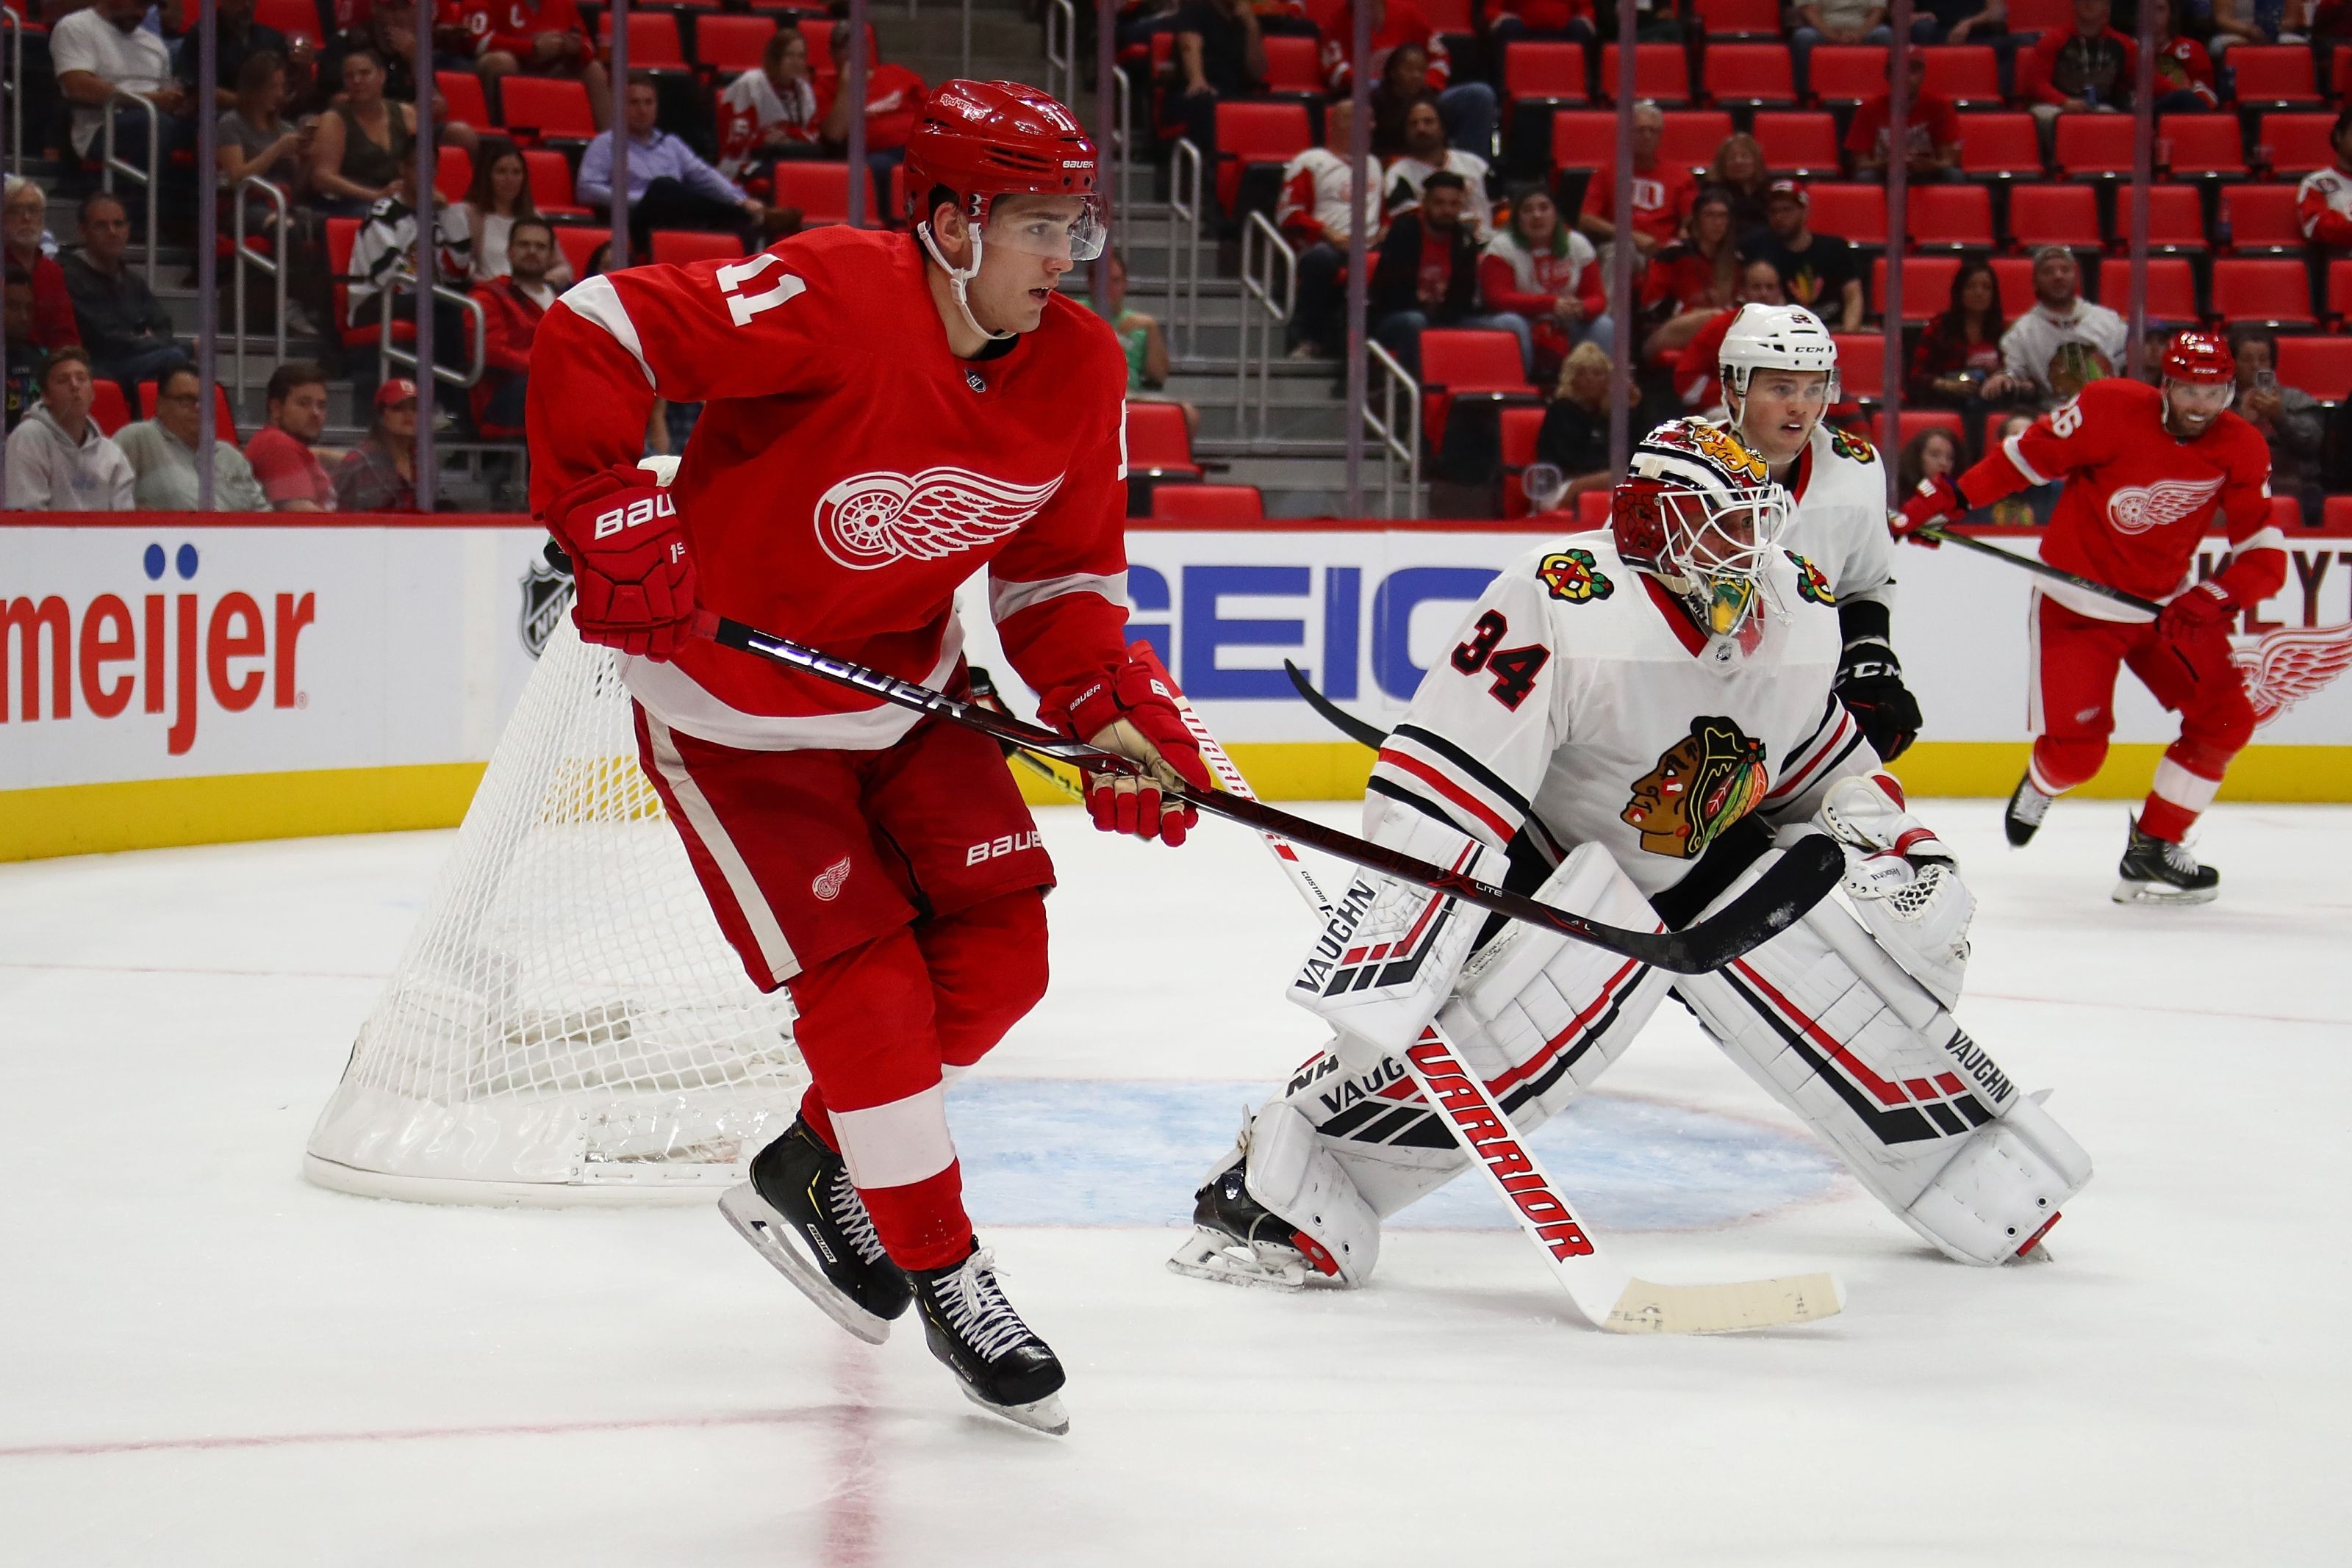 How Are the Detroit Red Wings Top Five NHL Draft Picks Performing?